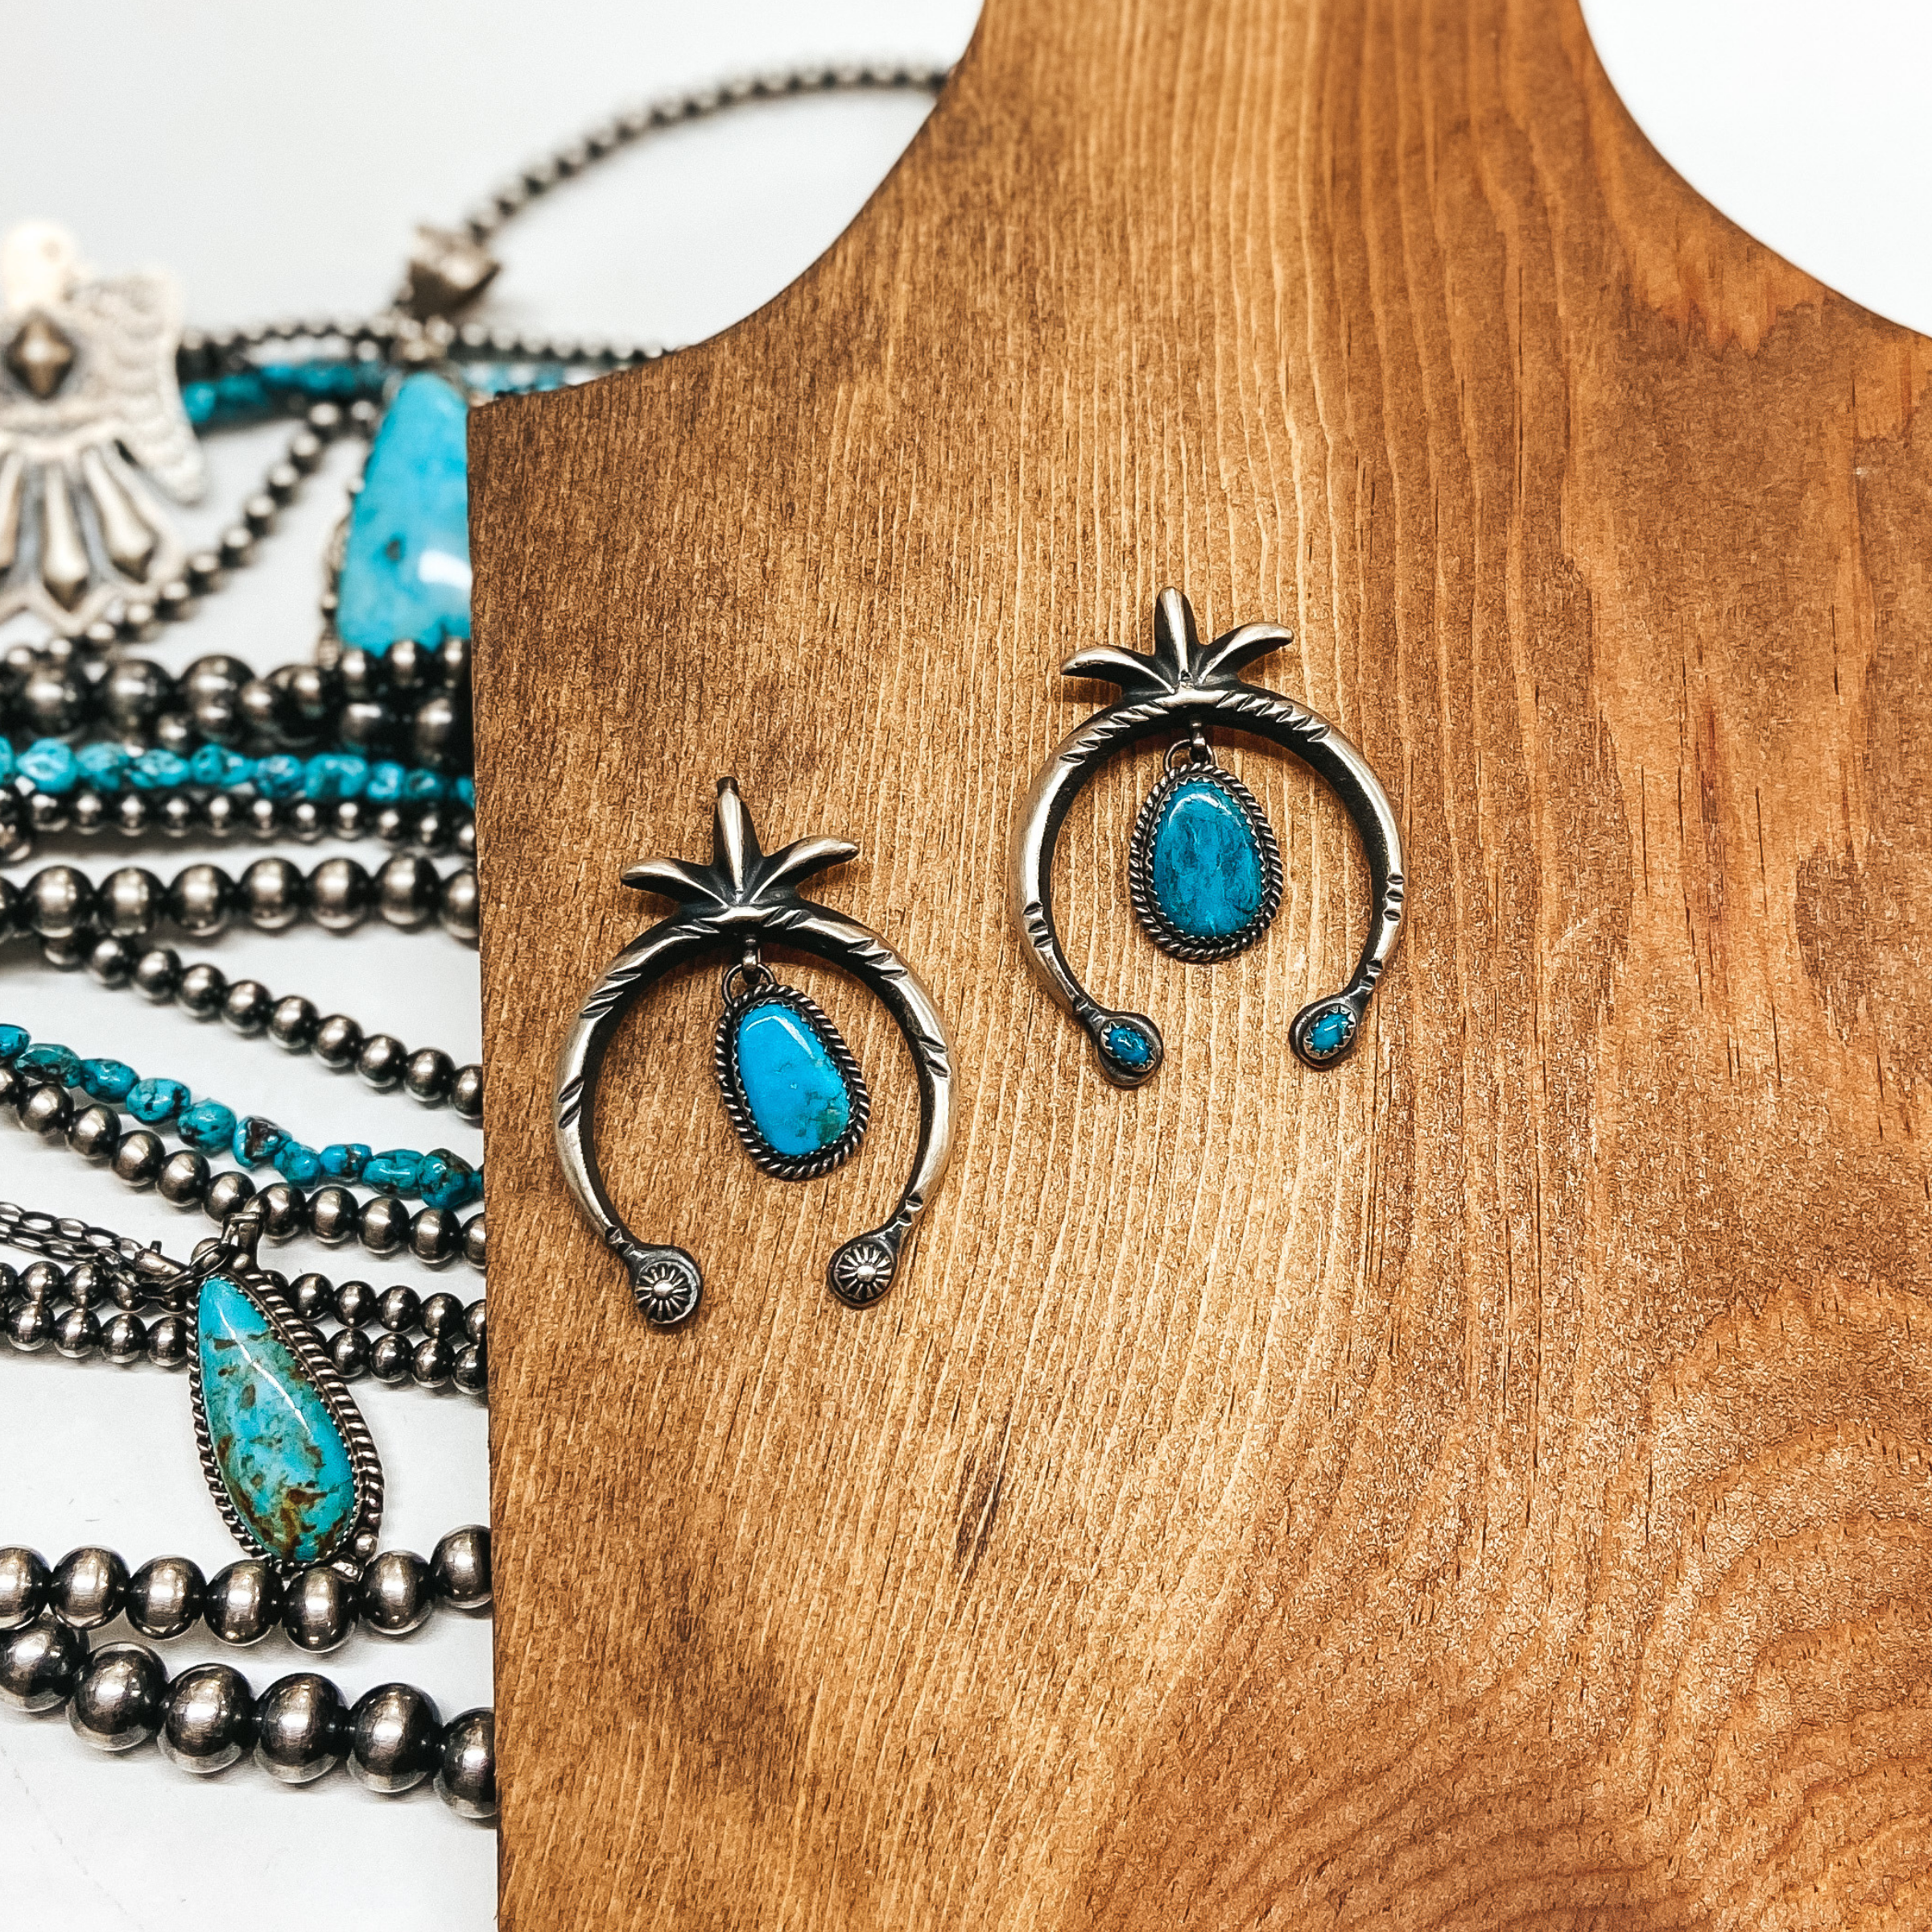 Two sterling silver Naja shaped necklace pendants with silver tooling and turquoise center dangles. Pendants are pictured on a wooden background with Navajo pearls and turquoise jewelry.